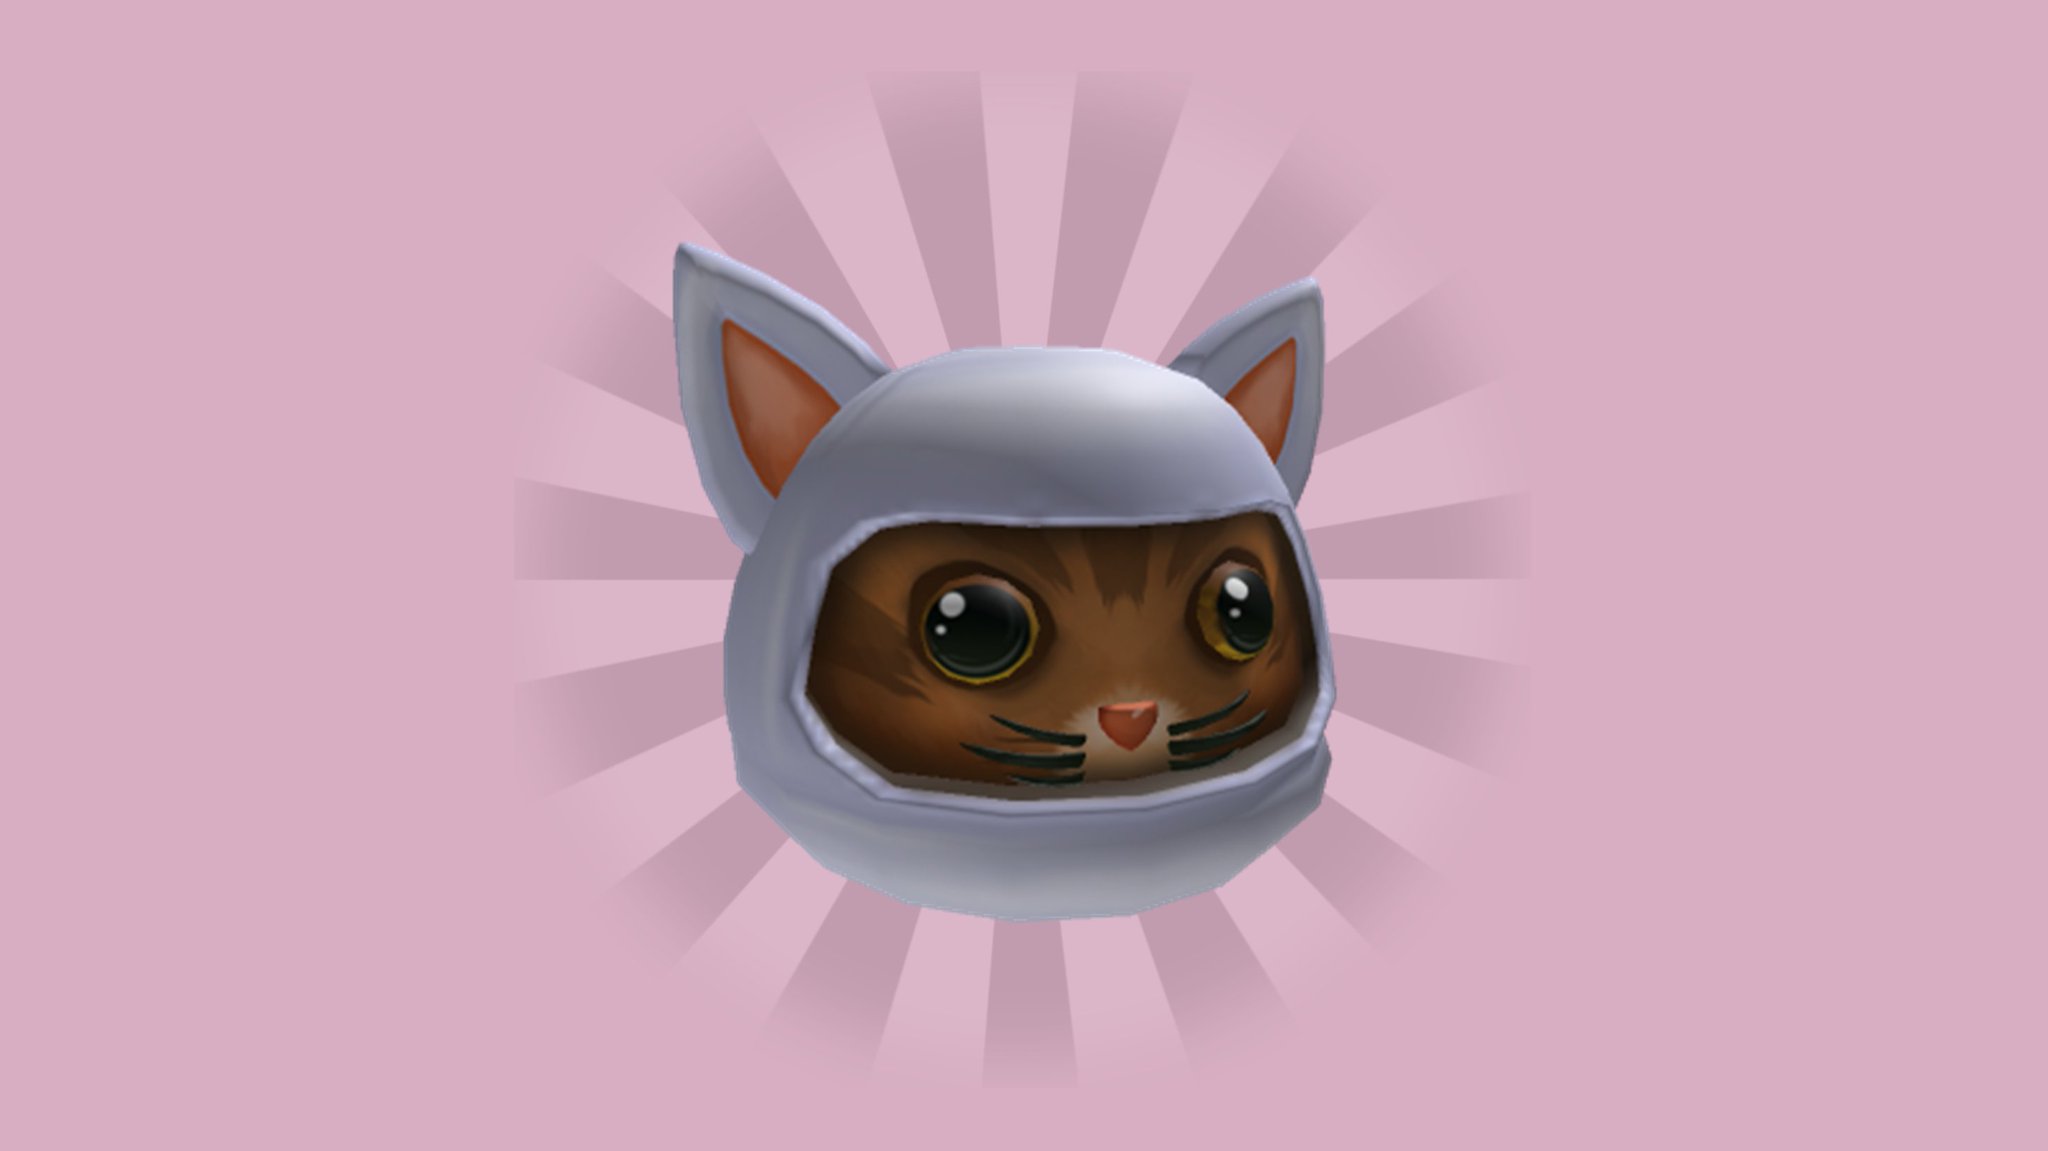 Bloxy News On Twitter New Promo Code Head To Https T Co 7qvdjgejbm And Enter The Code Rihappycat2021 To Receive The Free Arctic Ninja Cat Accessory For Your Roblox Avatar Https T Co Uefbik3mrq - cat codes in roblox